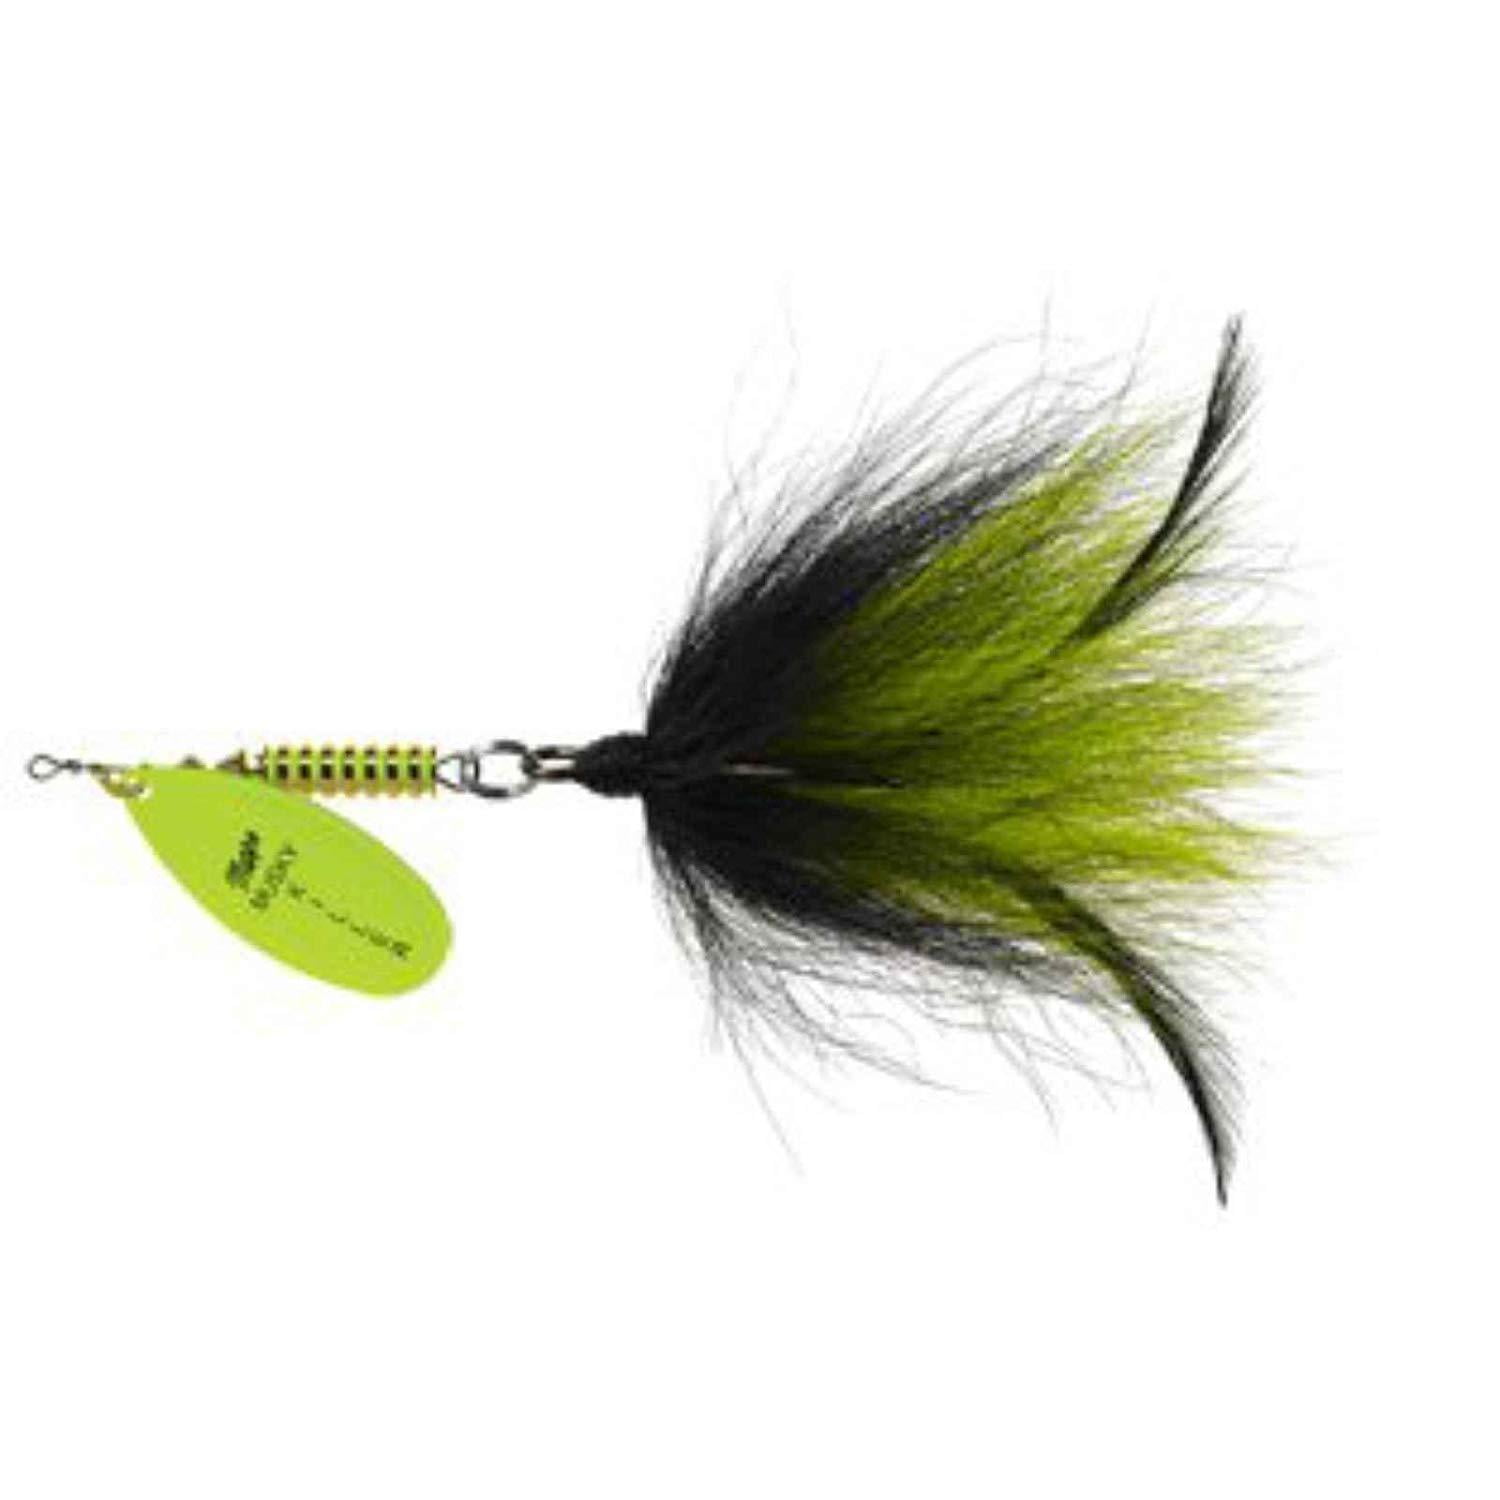 Mepps Musky Killer Bucktail Fishing Lure, Hot Chartreuse, Black, &  Chartreuse, 3/4 oz., Size 5/0 